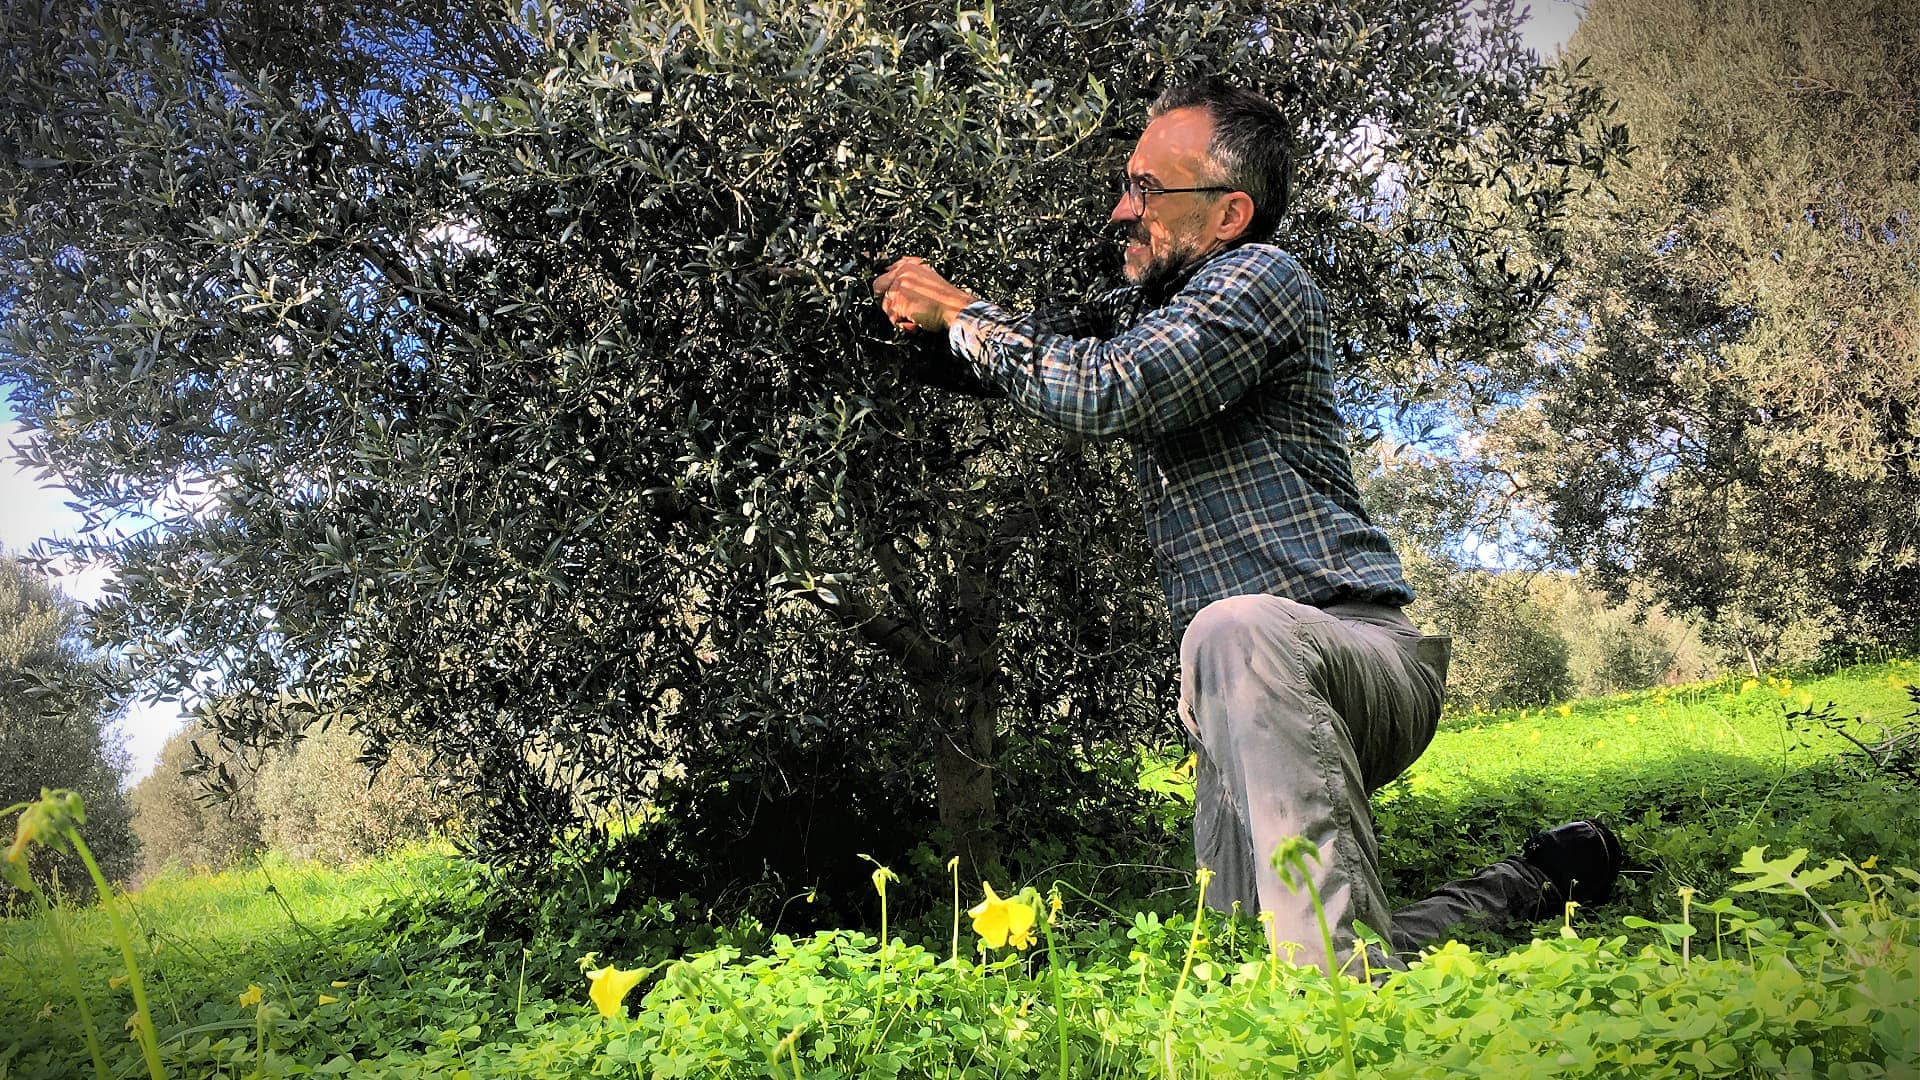 world-production-producers-express-alarm-in-latest-olive-oil-times-survey-olive-oil-times